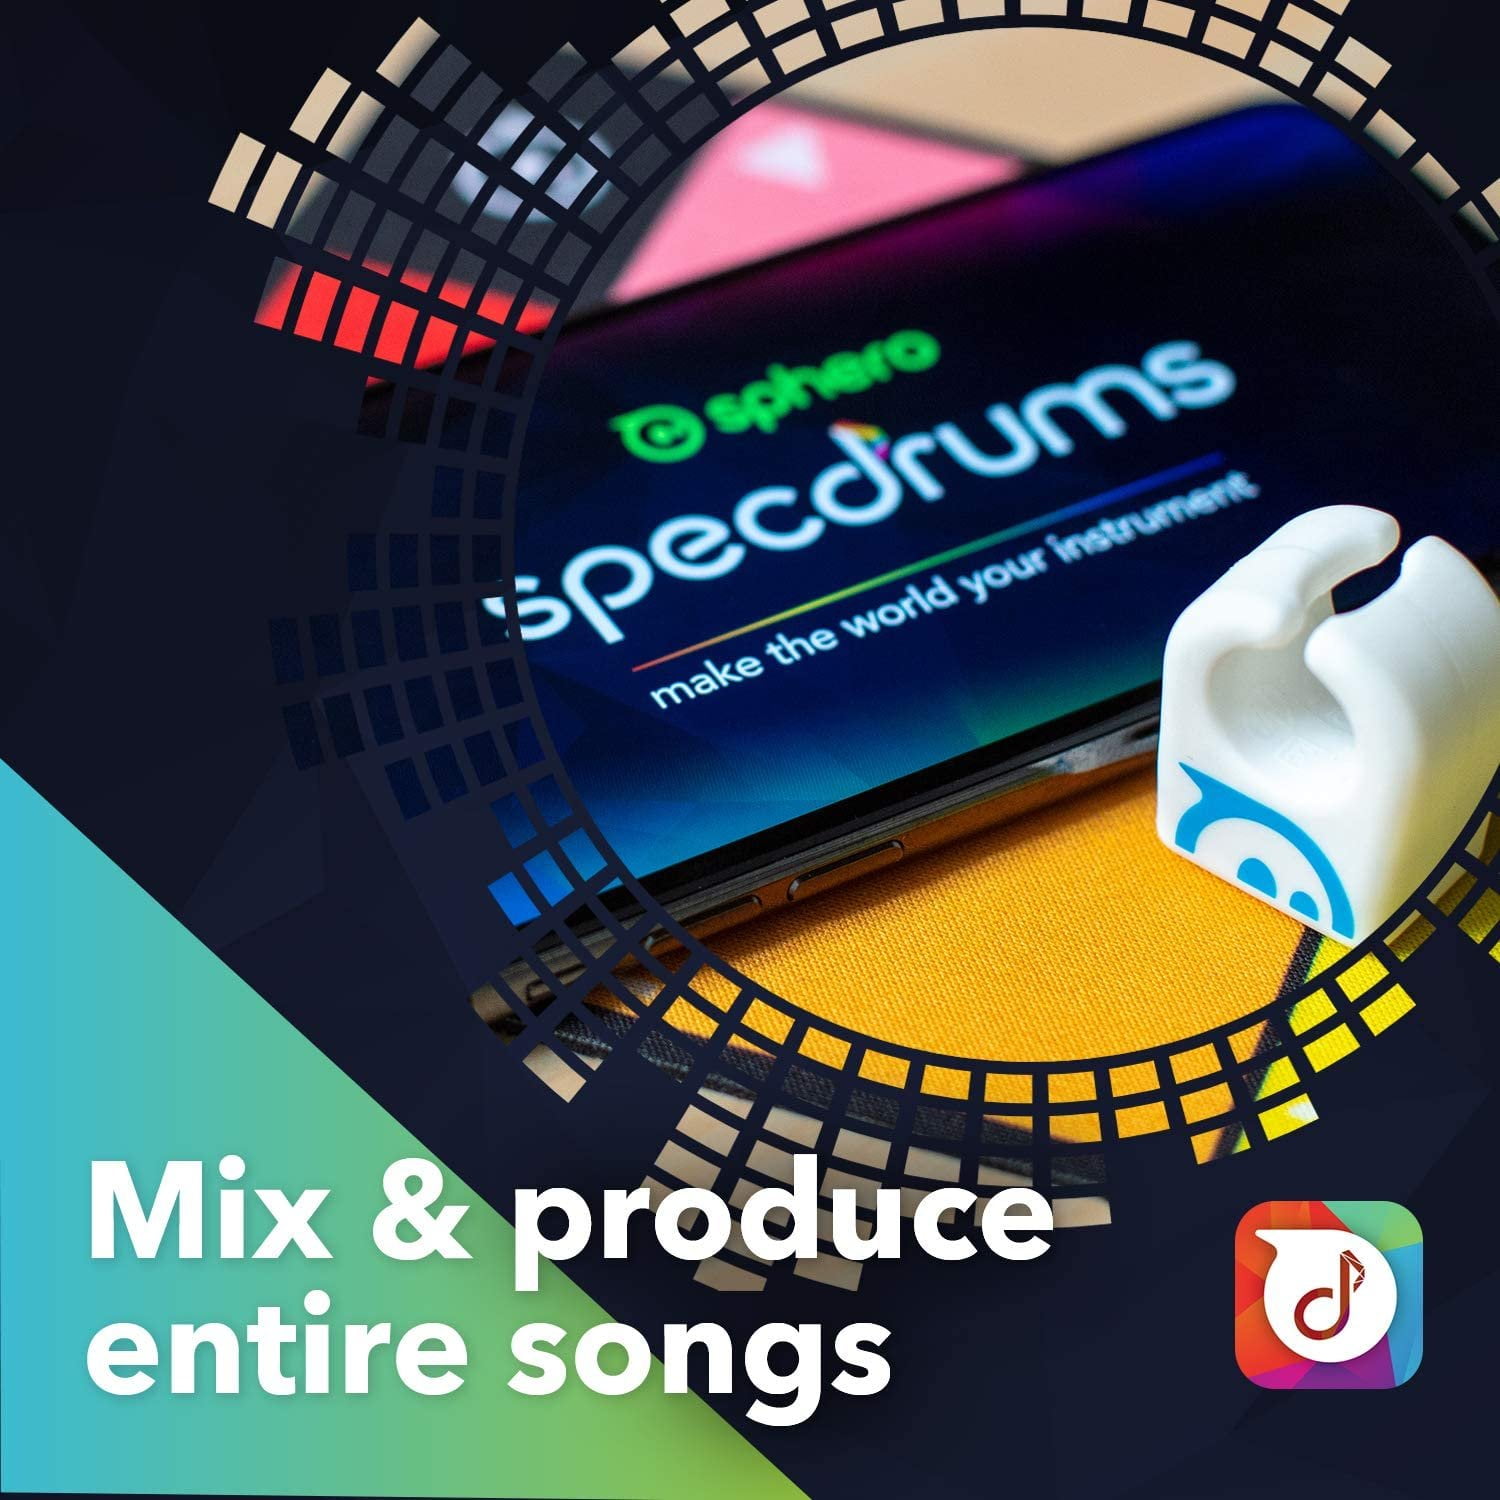 Sphero Specdrums (2 Rings) App-Enabled Musical Rings with Play Pad Included  - White (SD01WRW2), Package may vary